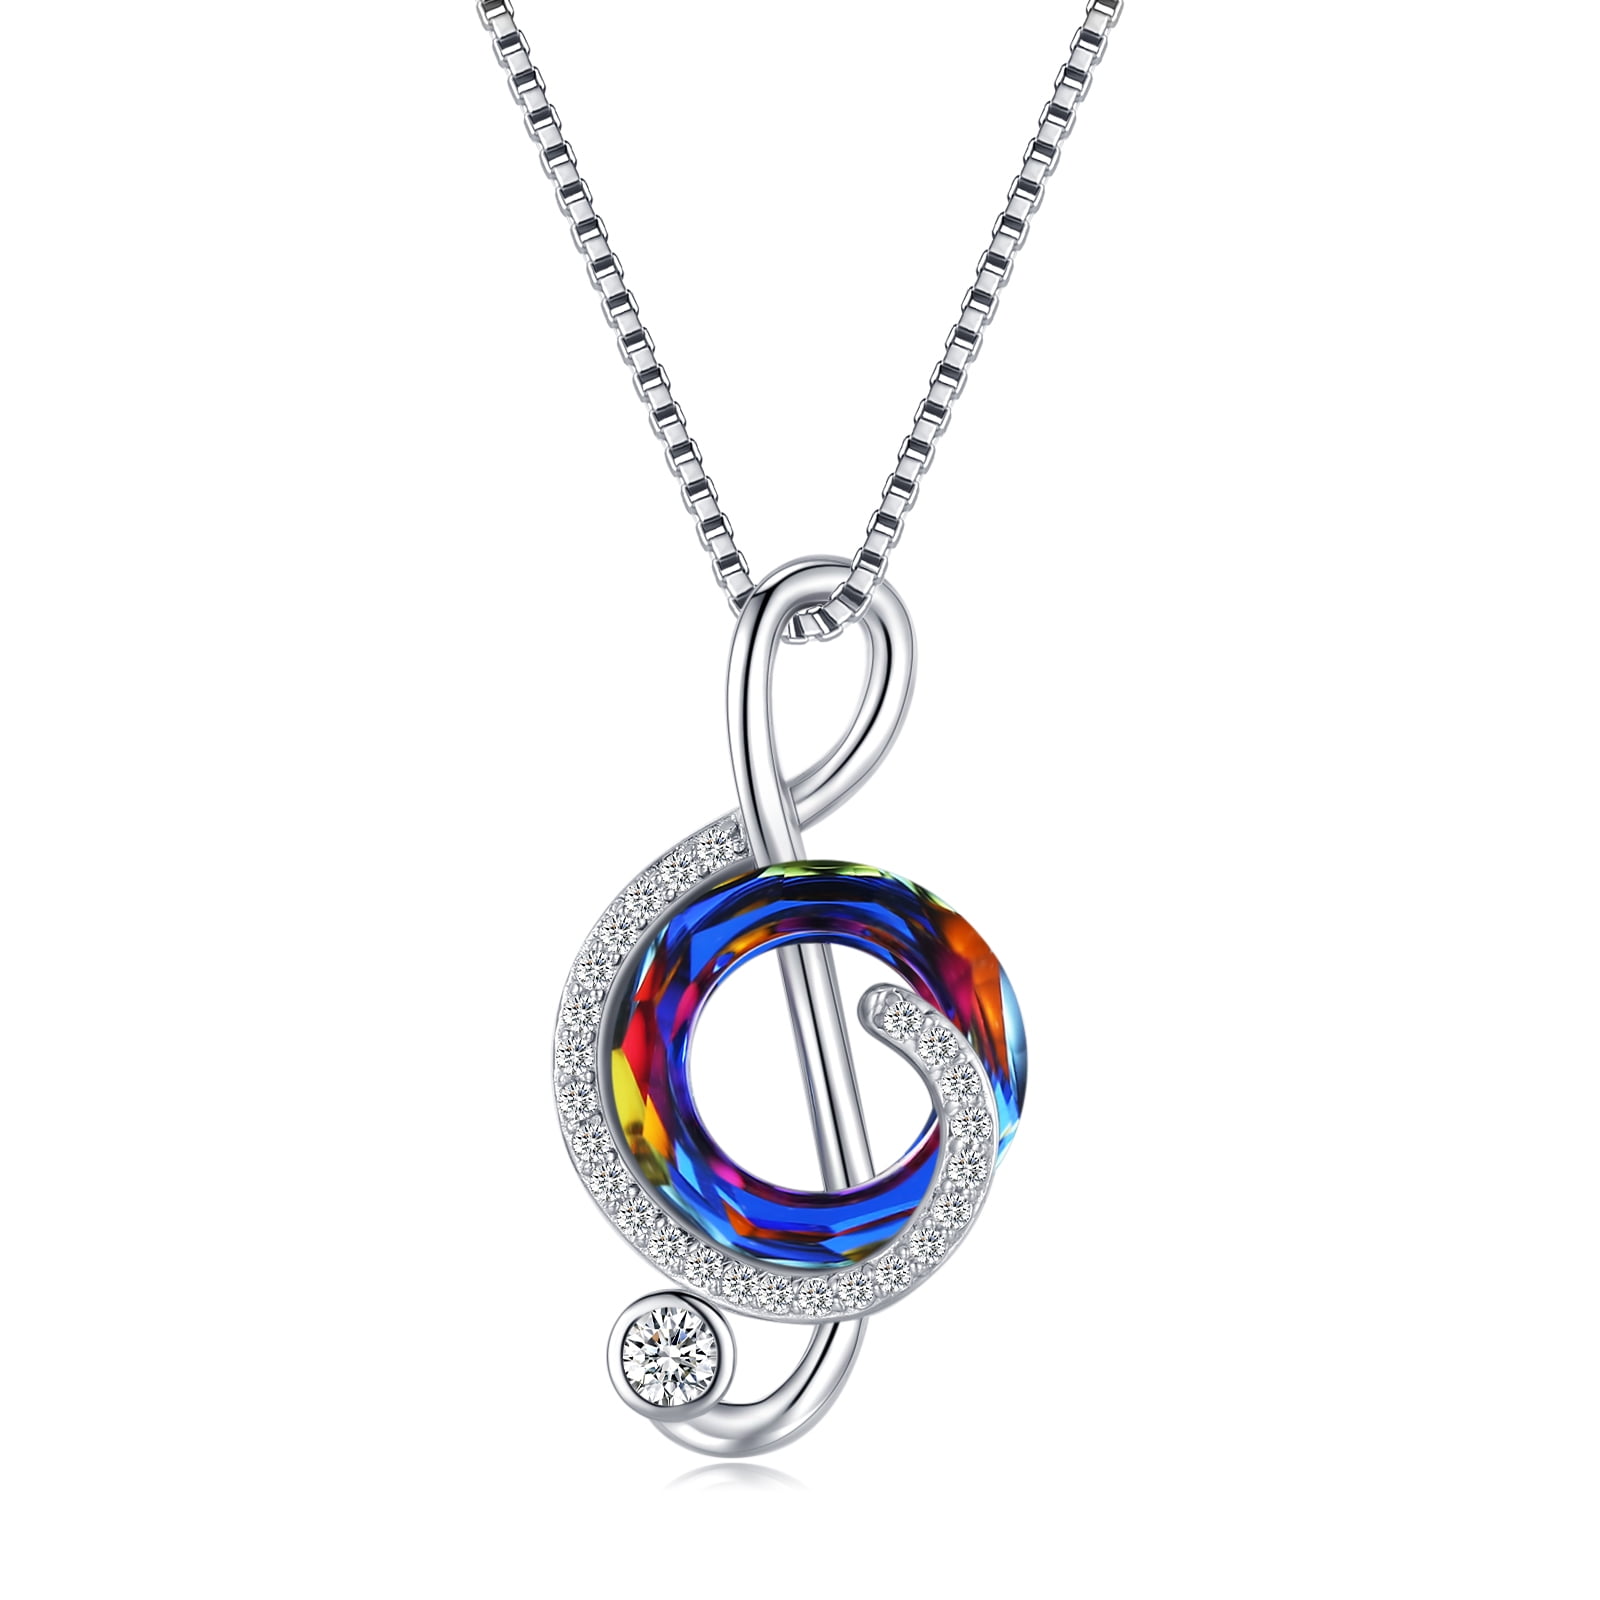 Treble Clef Gifts Treble Clef Jewelry Musical Note Necklace Music Note Jewelry Rhinestone Treble Clef Silver Plated Necklace